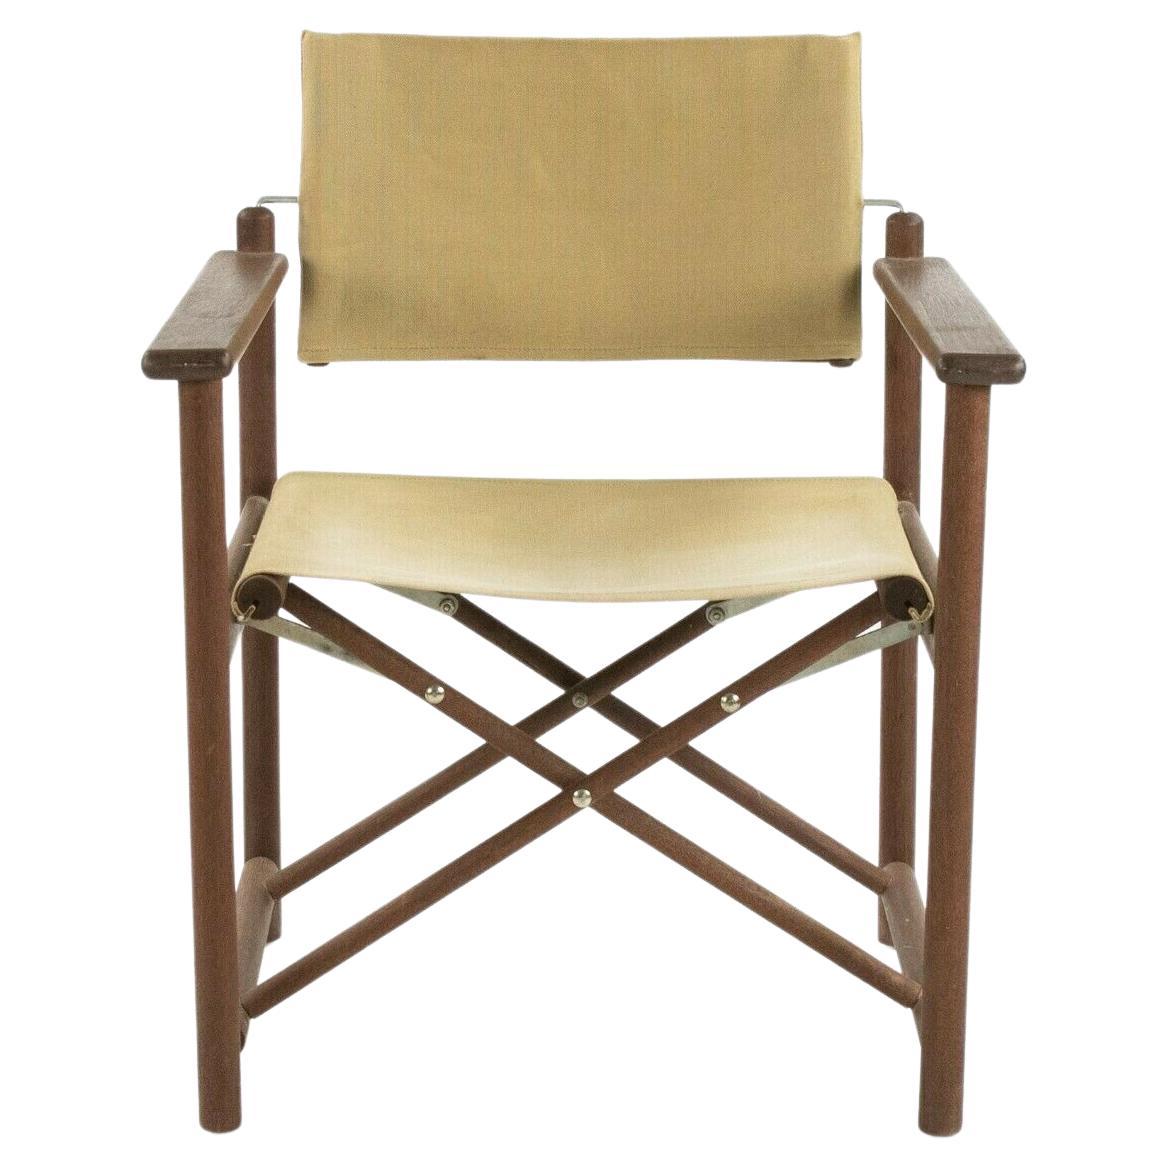 1960s Danish Modern Walnut and Canvas Folding Campaign Chair For Sale